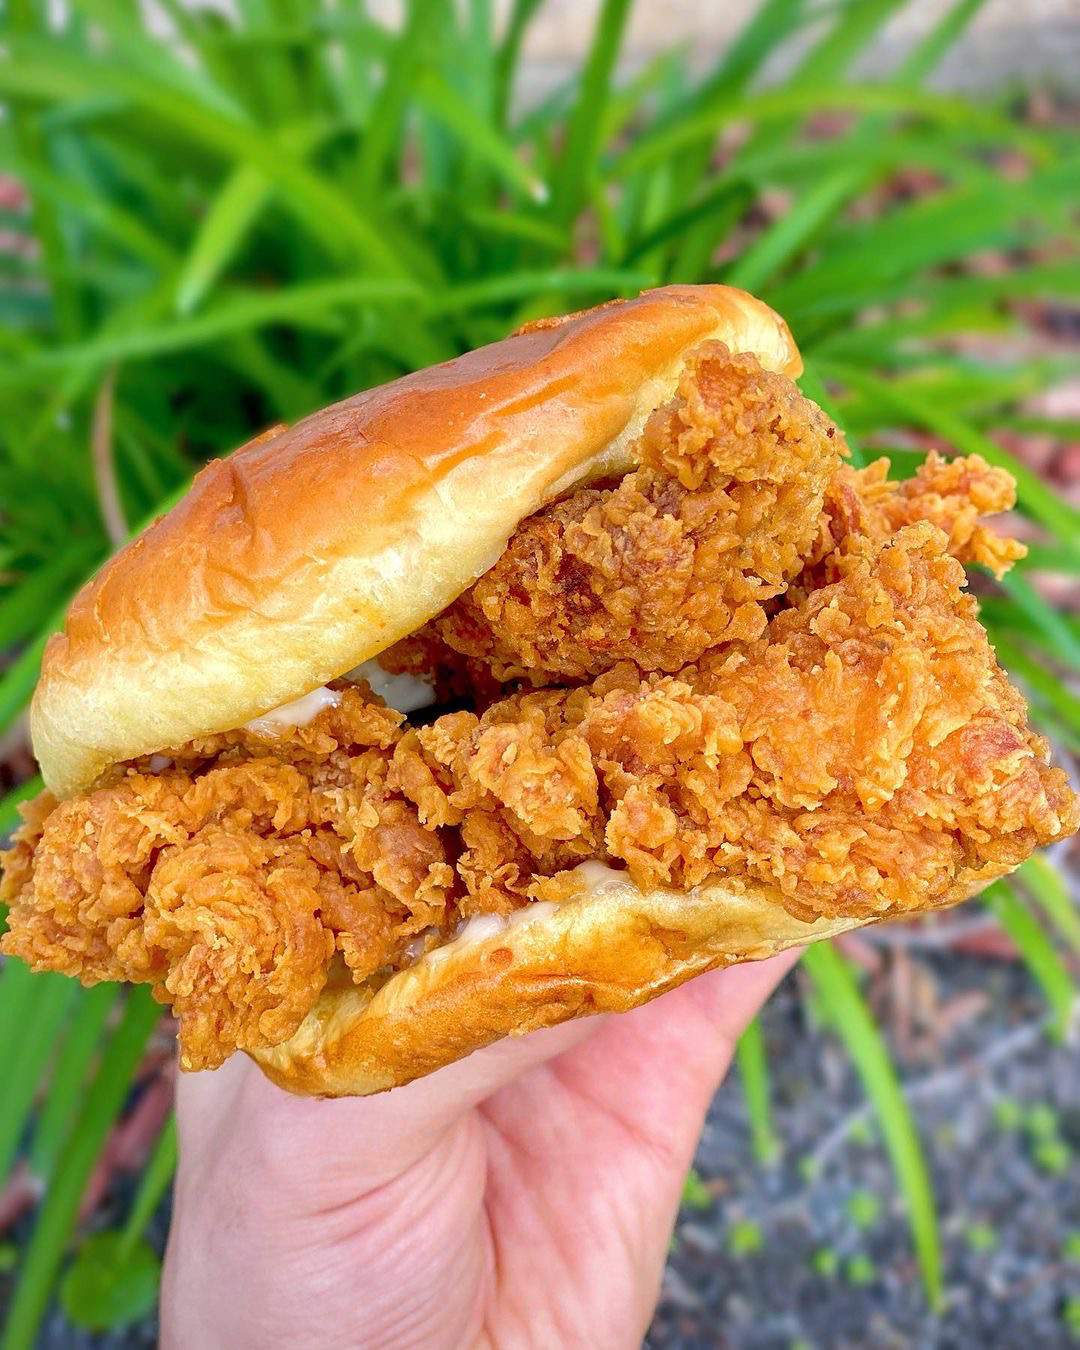 How to get a free Popeyes chicken sandwich in Miami (while supporting a good cause)